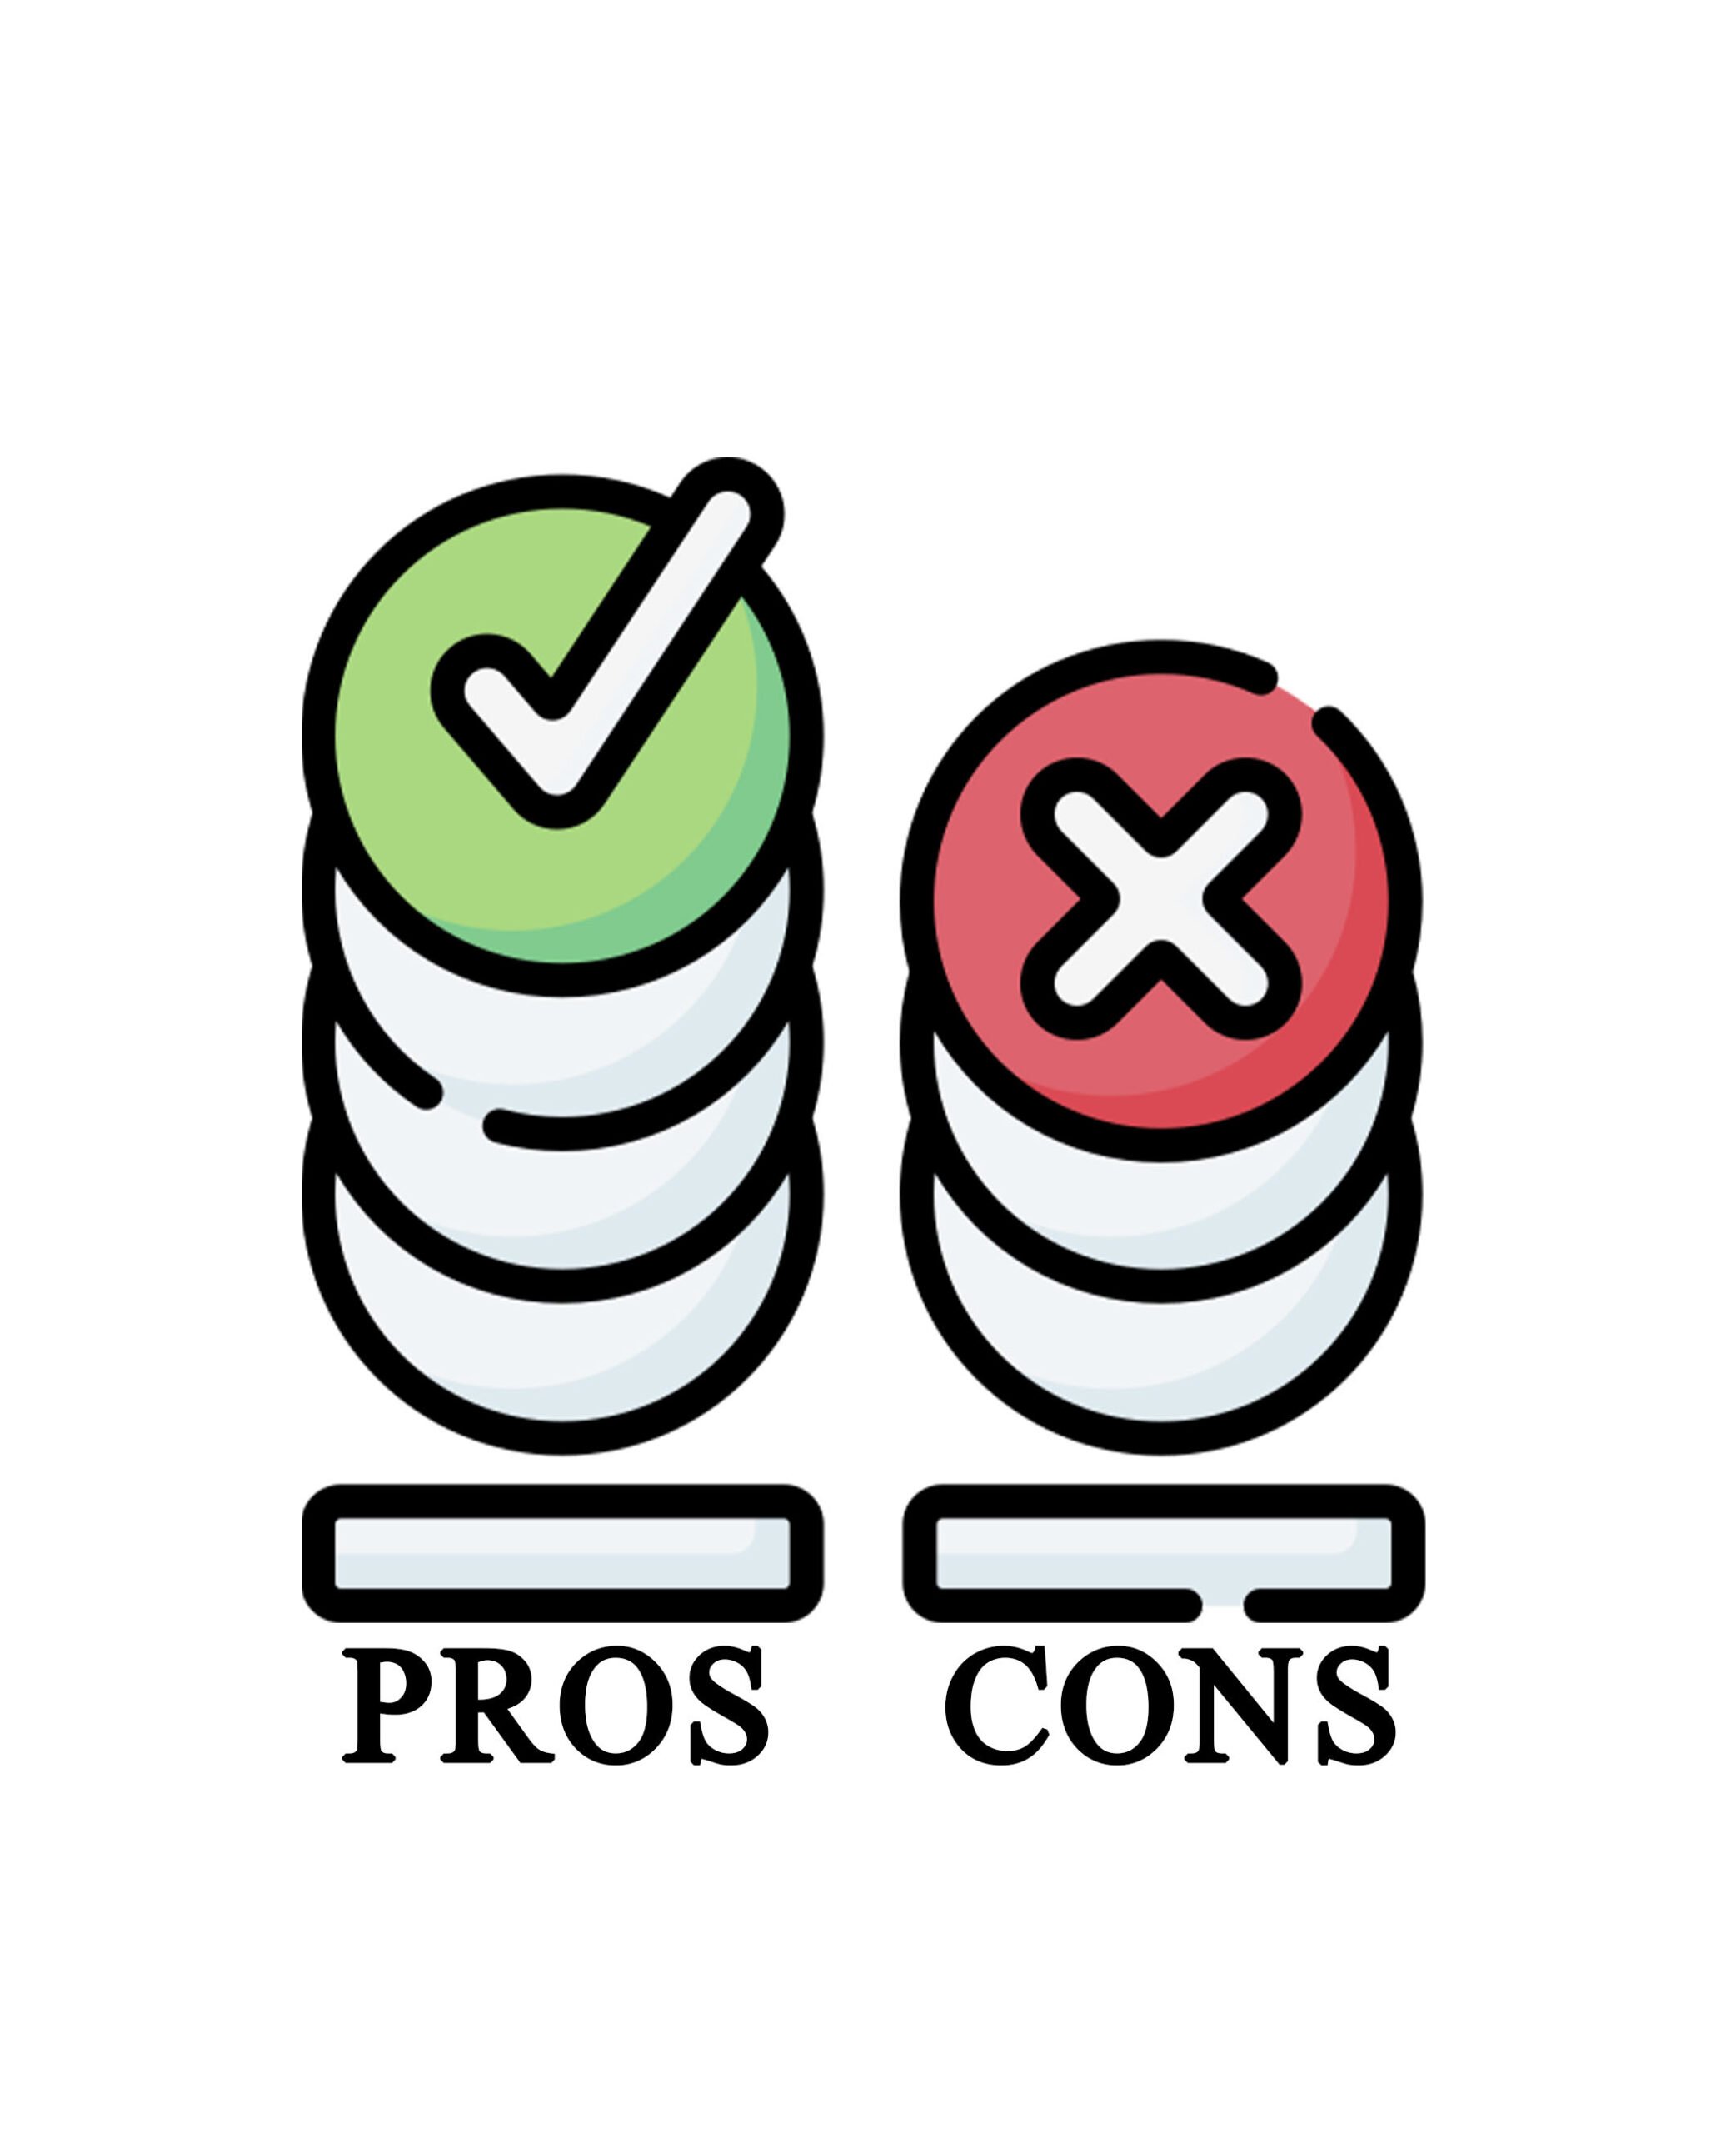 Pros and cons of copy trading